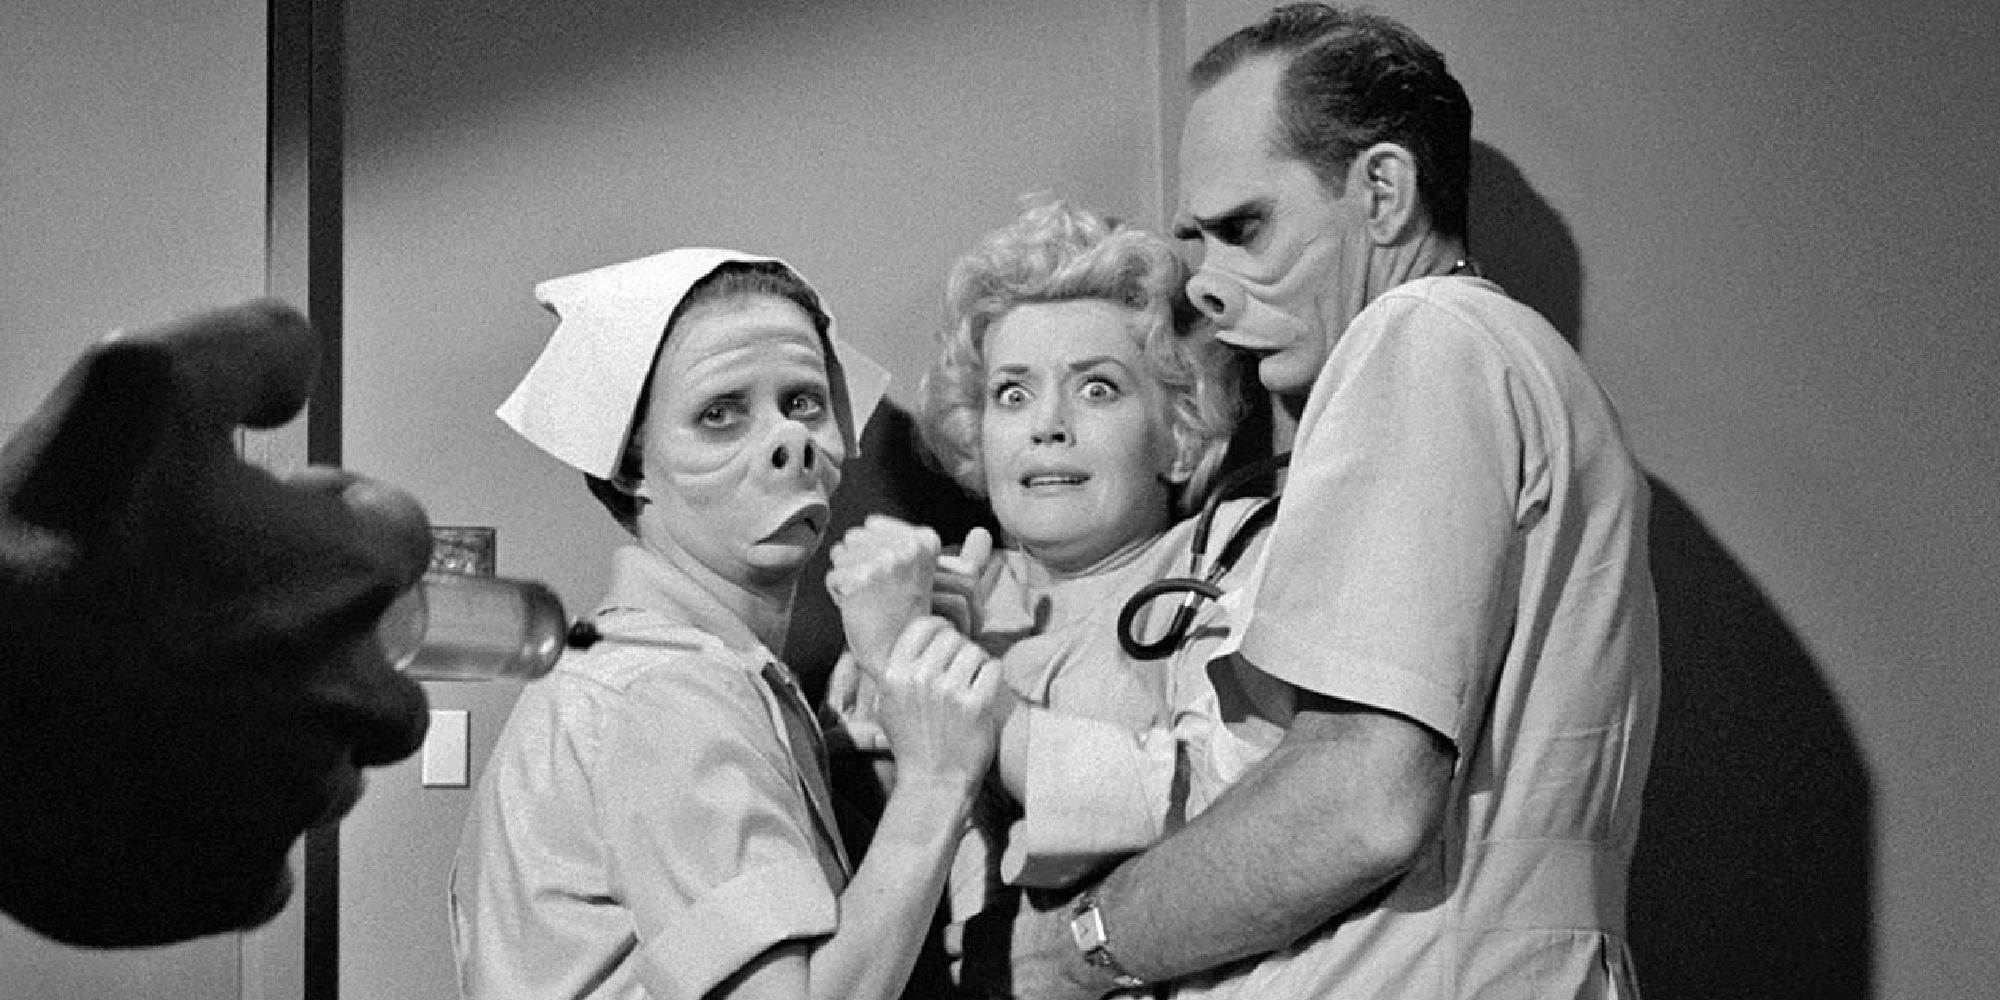 Jennifer Howard as Janet's Nurse and William Gordon as Dr. Bernardi with disfigured faces holding down Maxine Stuart as Janet Tylerwhile someone approaches with a syringe in Eye of the Beholder from The Twilight Zone